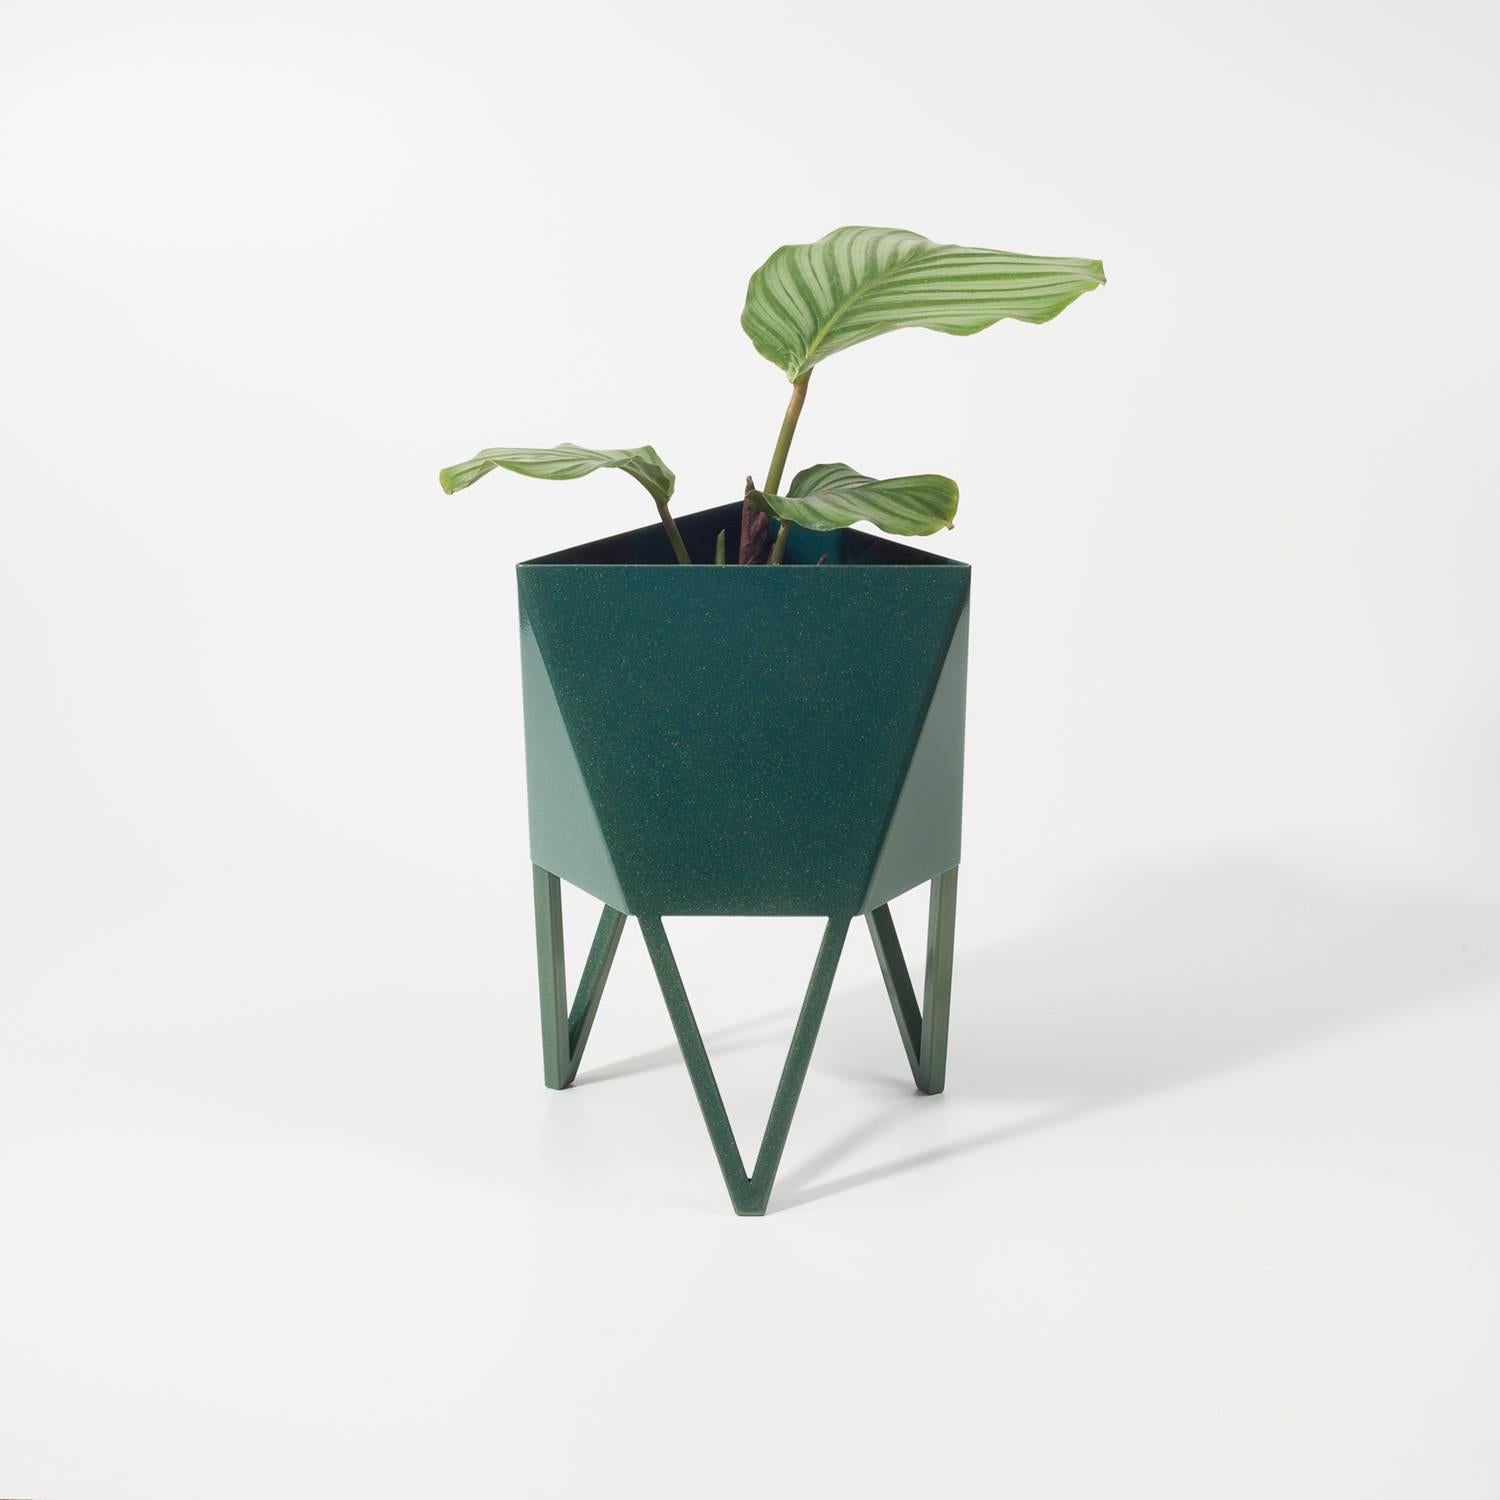 Contemporary Deca Planter in Glossy Maroon Steel, Small, by Force/Collide